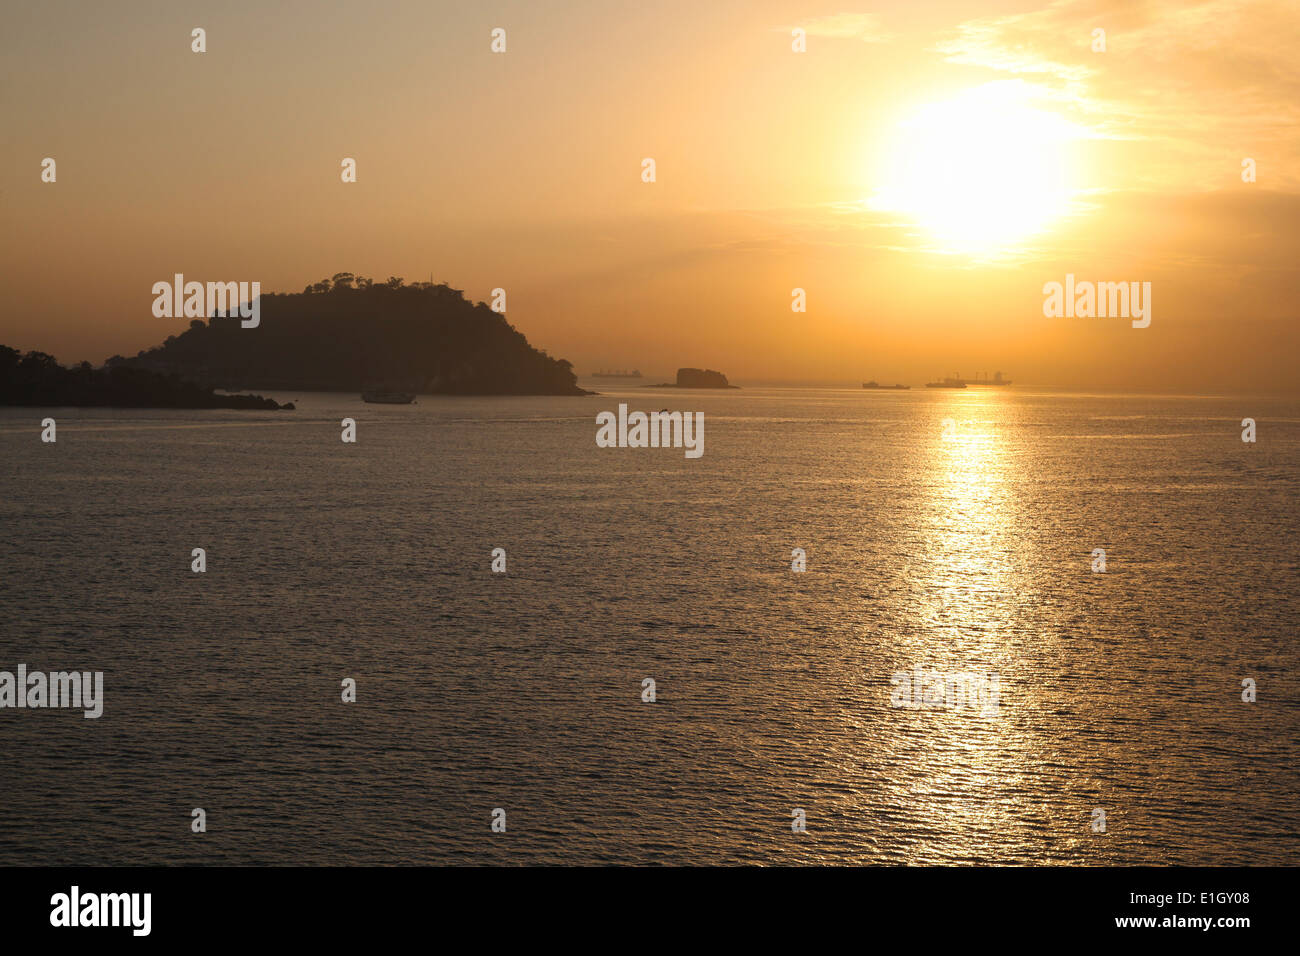 Sunset over the Pacific ocean looking towards Fuerte Amador with cargo ships in the distance, Panama, Central America. Stock Photo